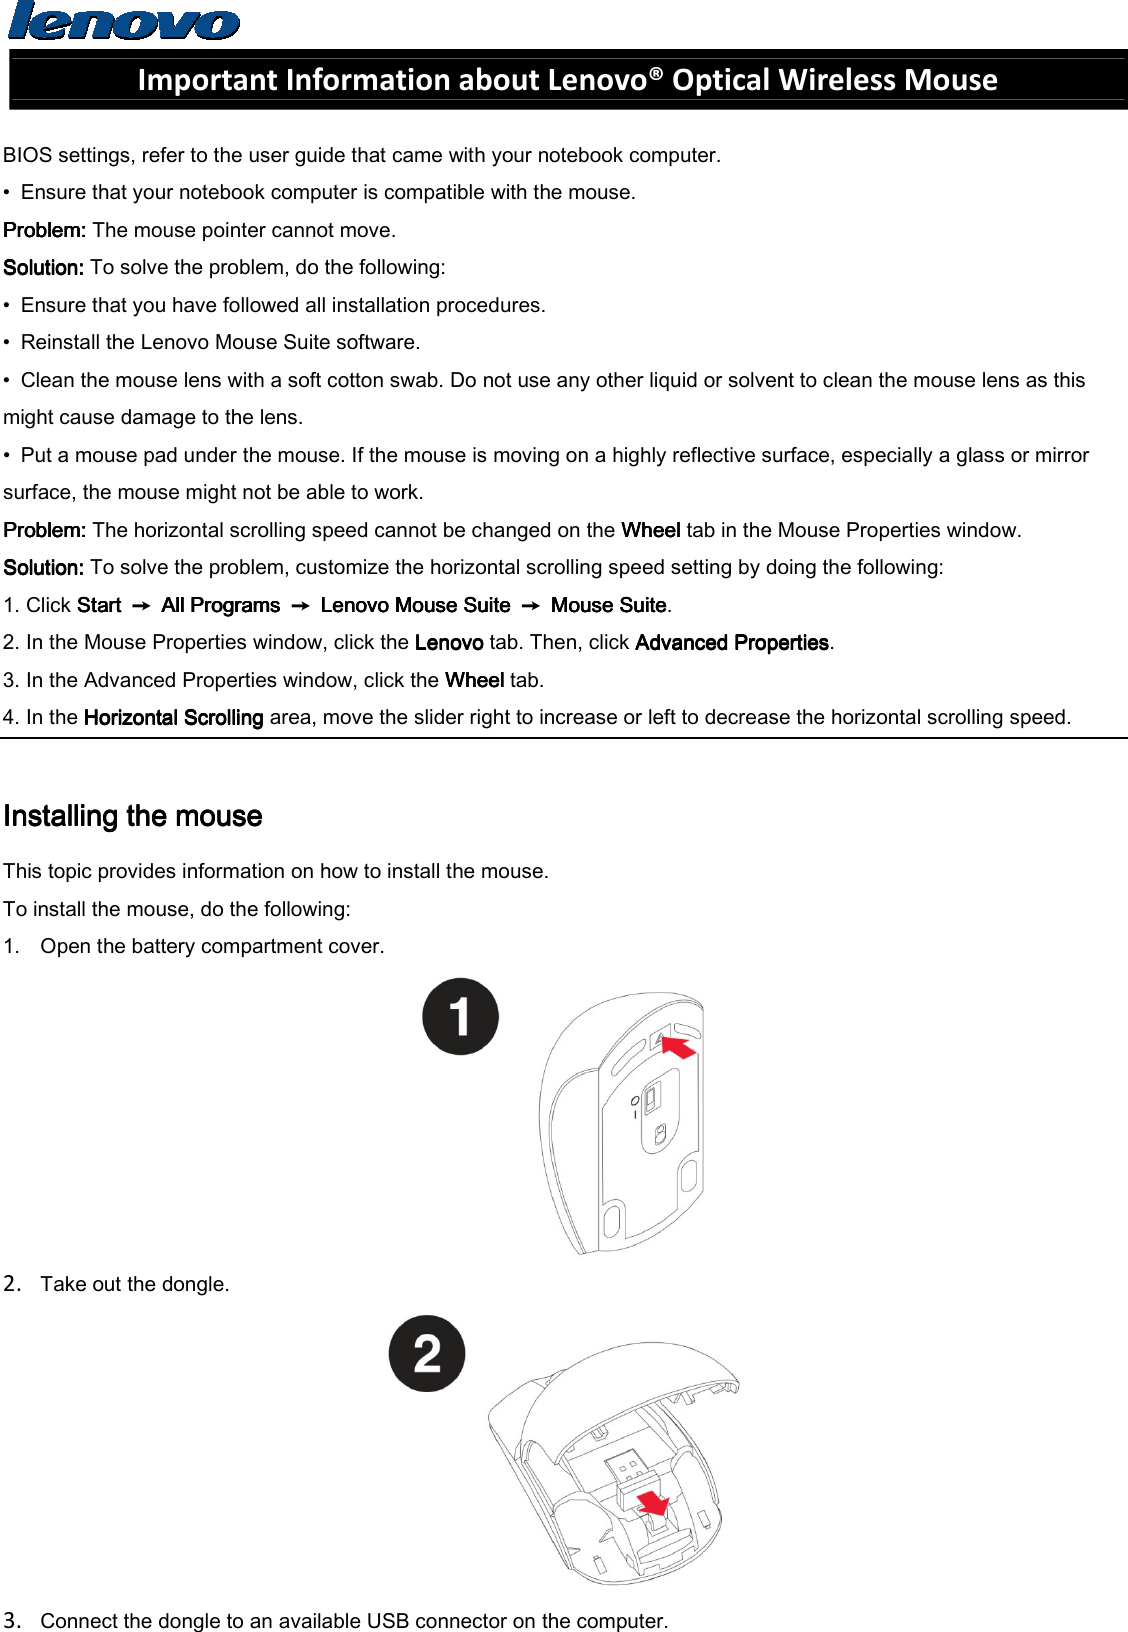  Important Information about Lenovo® Optical Wireless Mouse  BIOS settings, refer to the user guide that came with your notebook computer. •  Ensure that your notebook computer is compatible with the mouse. Problem: Problem: Problem: Problem: The mouse pointer cannot move. Solution: Solution: Solution: Solution: To solve the problem, do the following: •  Ensure that you have followed all installation procedures. •  Reinstall the Lenovo Mouse Suite software. •  Clean the mouse lens with a soft cotton swab. Do not use any other liquid or solvent to clean the mouse lens as this might cause damage to the lens. •  Put a mouse pad under the mouse. If the mouse is moving on a highly reflective surface, especially a glass or mirror surface, the mouse might not be able to work. Problem: Problem: Problem: Problem: The horizontal scrolling speed cannot be changed on the Wheel Wheel Wheel Wheel tab in the Mouse Properties window. Solution: Solution: Solution: Solution: To solve the problem, customize the horizontal scrolling speed setting by doing the following: 1. Click Start Start Start Start  ➙  All Programs All Programs All Programs All Programs  ➙  Lenovo Mouse Suite Lenovo Mouse Suite Lenovo Mouse Suite Lenovo Mouse Suite  ➙  Mouse SuiteMouse SuiteMouse SuiteMouse Suite. 2. In the Mouse Properties window, click the Lenovo Lenovo Lenovo Lenovo tab. Then, click Advanced PropertiesAdvanced PropertiesAdvanced PropertiesAdvanced Properties. 3. In the Advanced Properties window, click the Wheel Wheel Wheel Wheel tab. 4. In the Horizontal Scrolling Horizontal Scrolling Horizontal Scrolling Horizontal Scrolling area, move the slider right to increase or left to decrease the horizontal scrolling speed.  Installing the mouseInstalling the mouseInstalling the mouseInstalling the mouse    This topic provides information on how to install the mouse. To install the mouse, do the following: 1. Open the battery compartment cover.  2. Take out the dongle.  3. Connect the dongle to an available USB connector on the computer. 